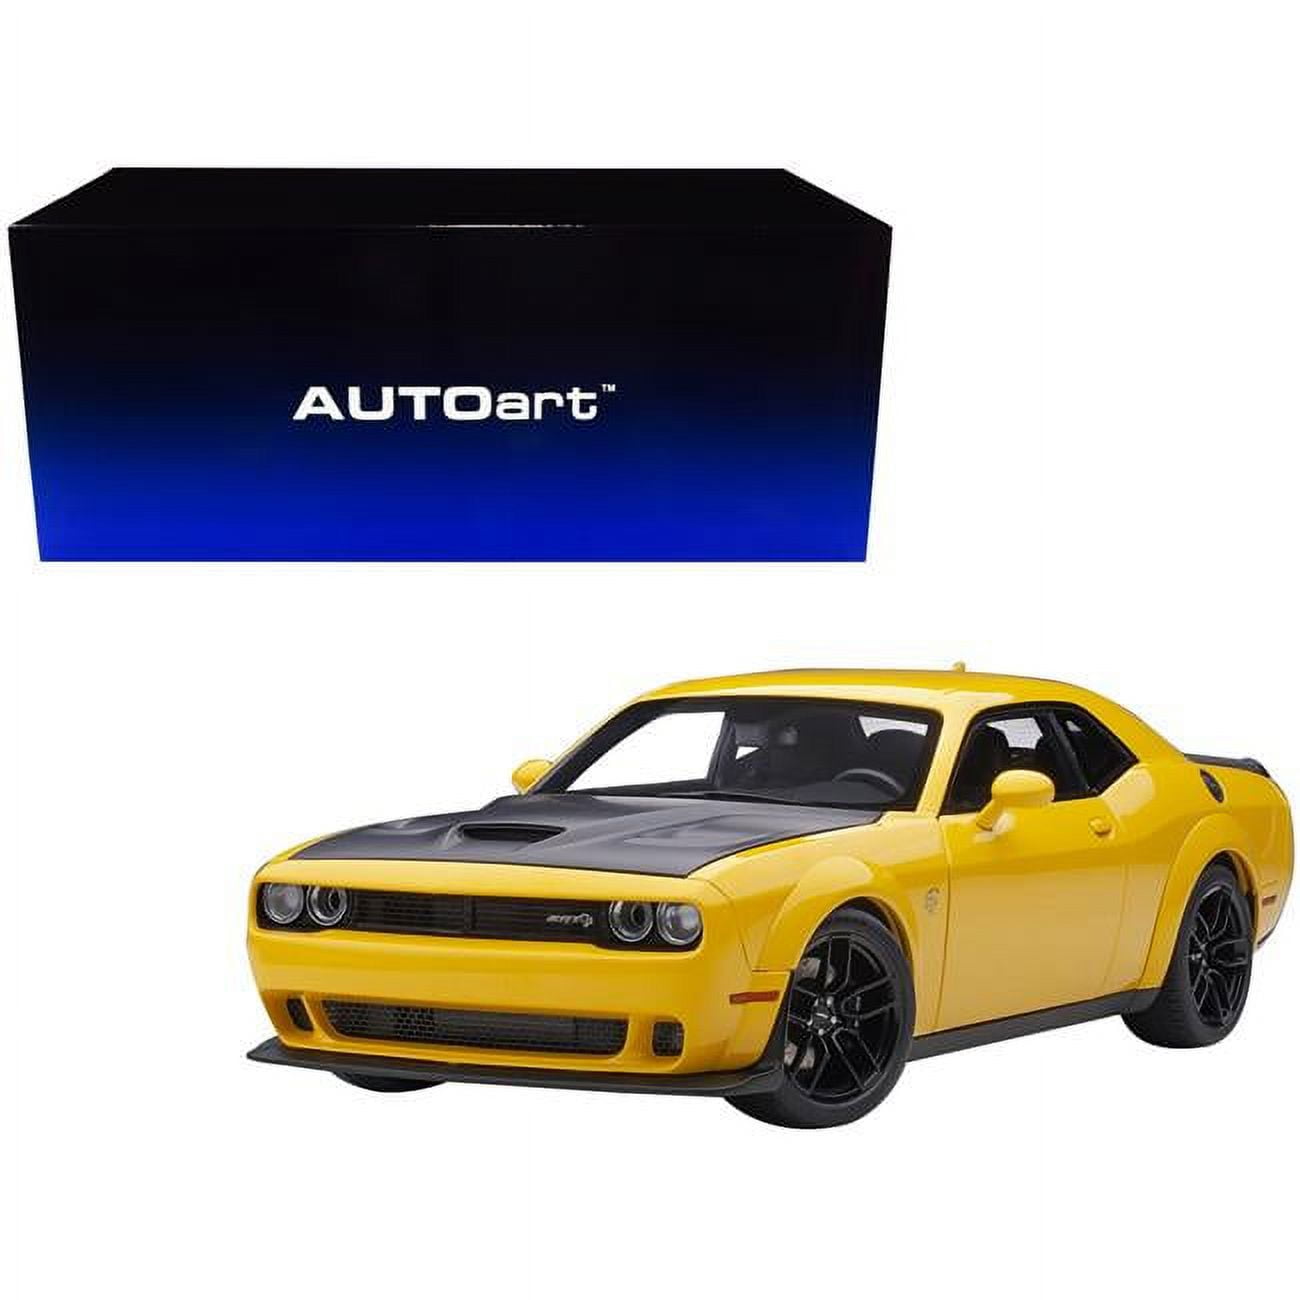 Picture of Autoart 71737 Yellow Jacket with Satin Black Hood 1 by 18 Scale Model Car for Dodge Challenger SRT Hellcat Widebody